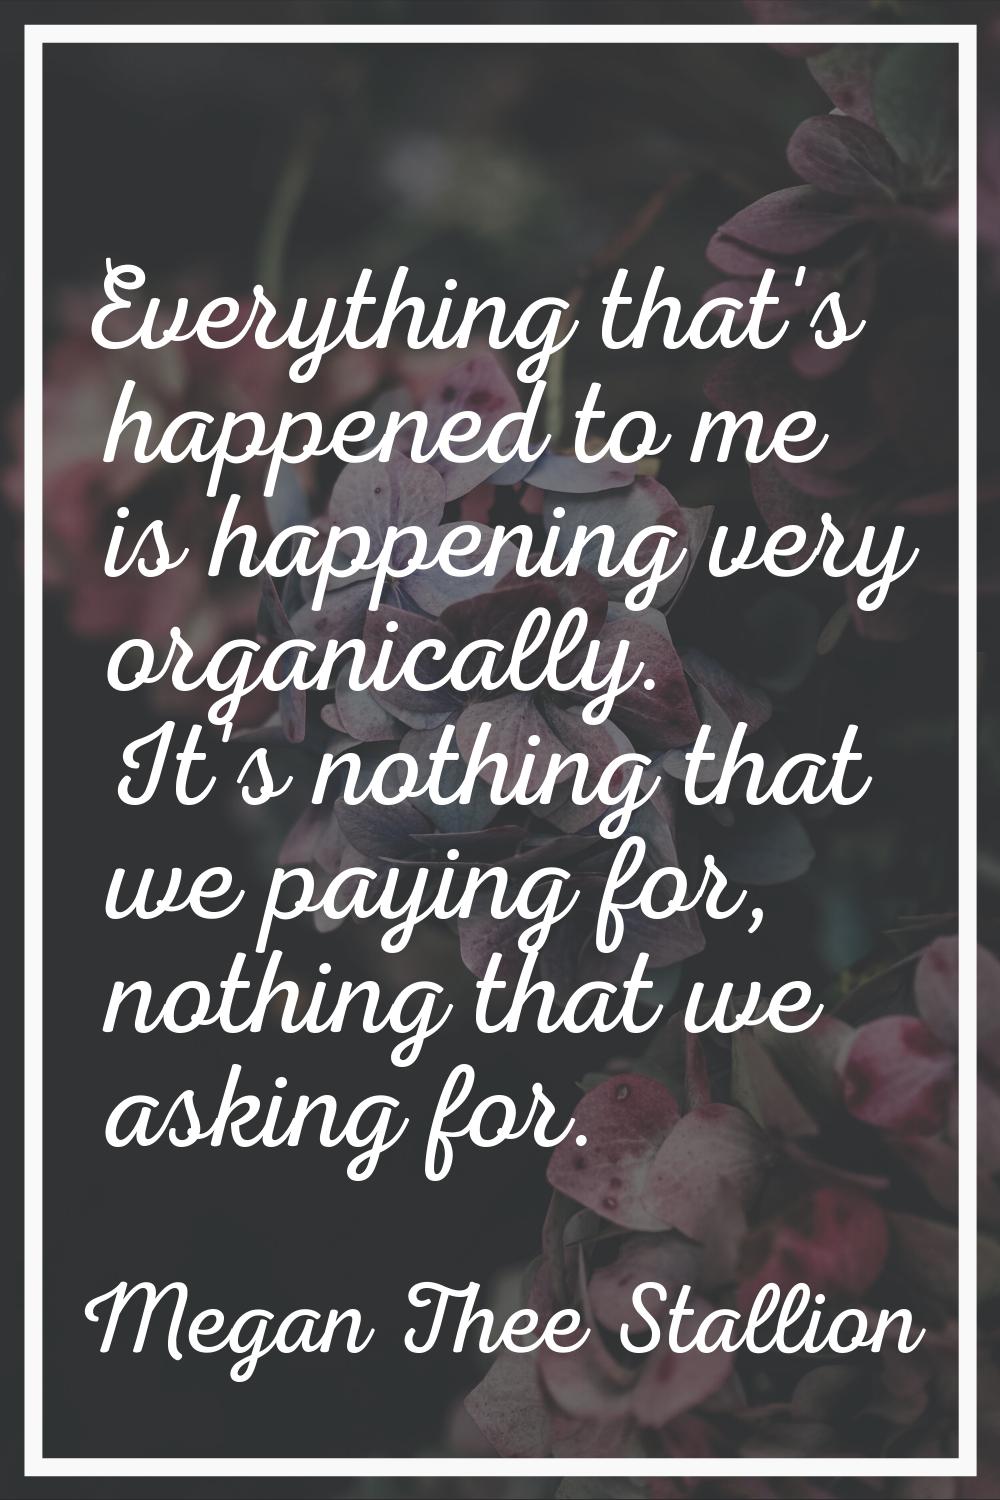 Everything that's happened to me is happening very organically. It's nothing that we paying for, no